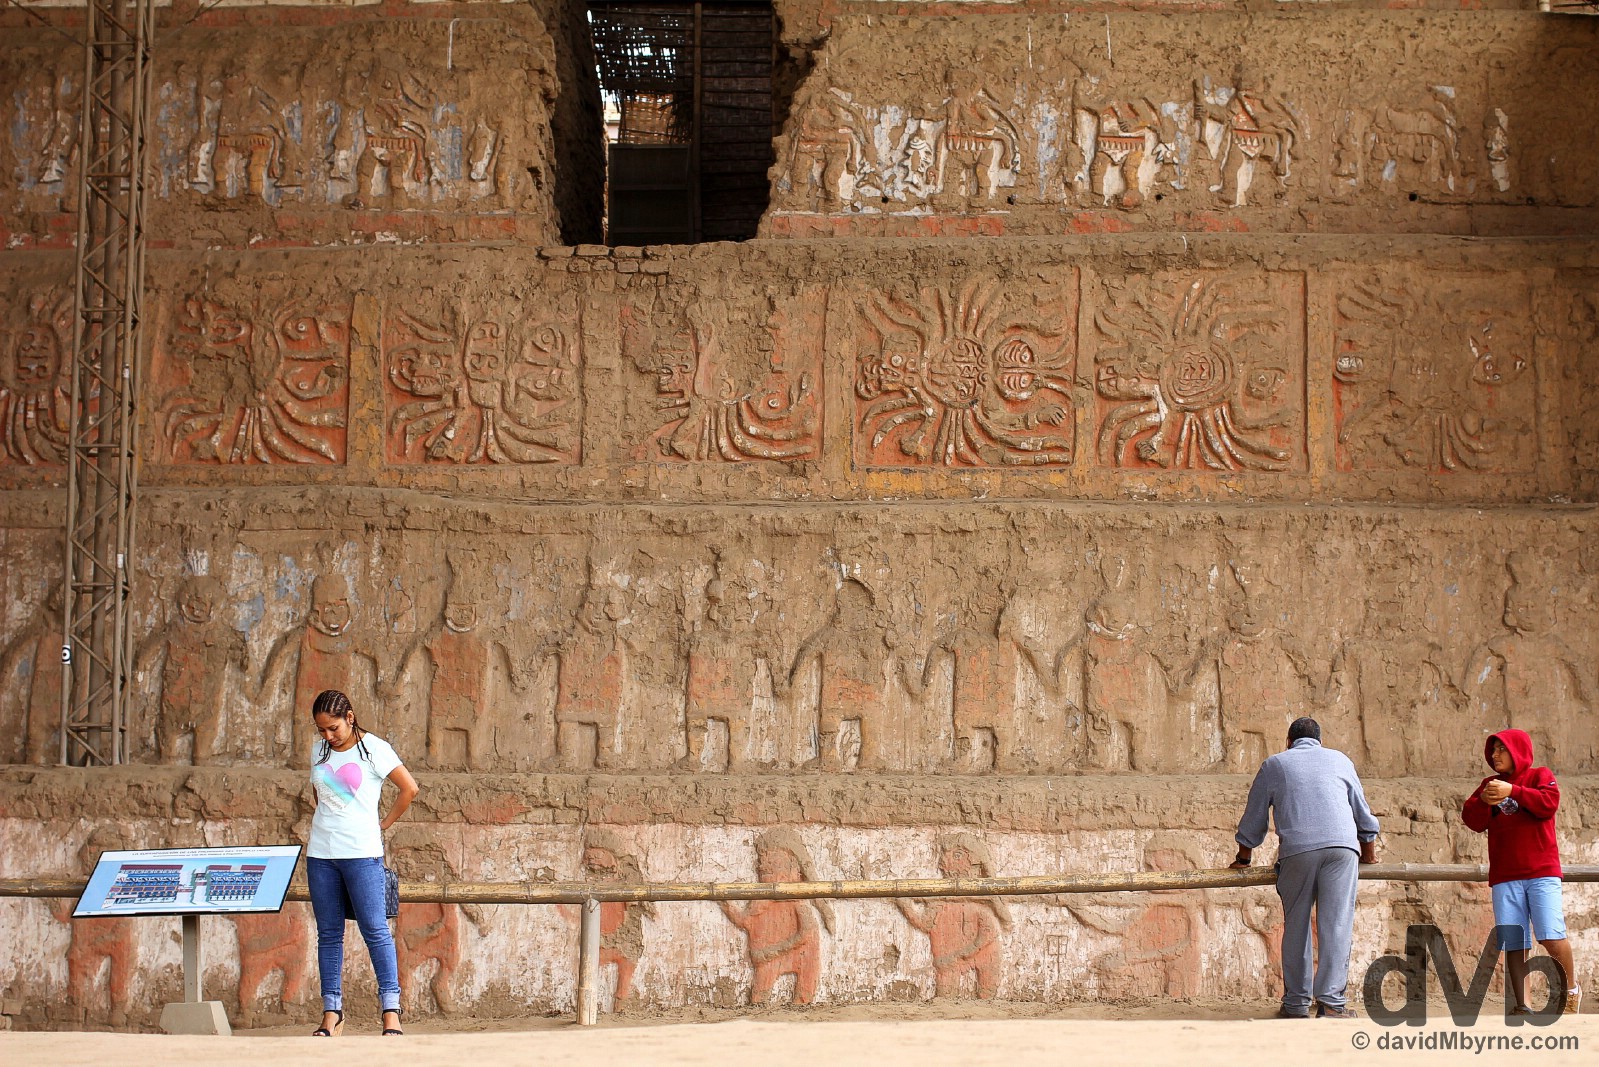 Adobe murals on the 7-tier north face of the Old Temple of Huaca de la Luna (Temple of the Moon), Moche, northwestern Peru. August 1, 2015.